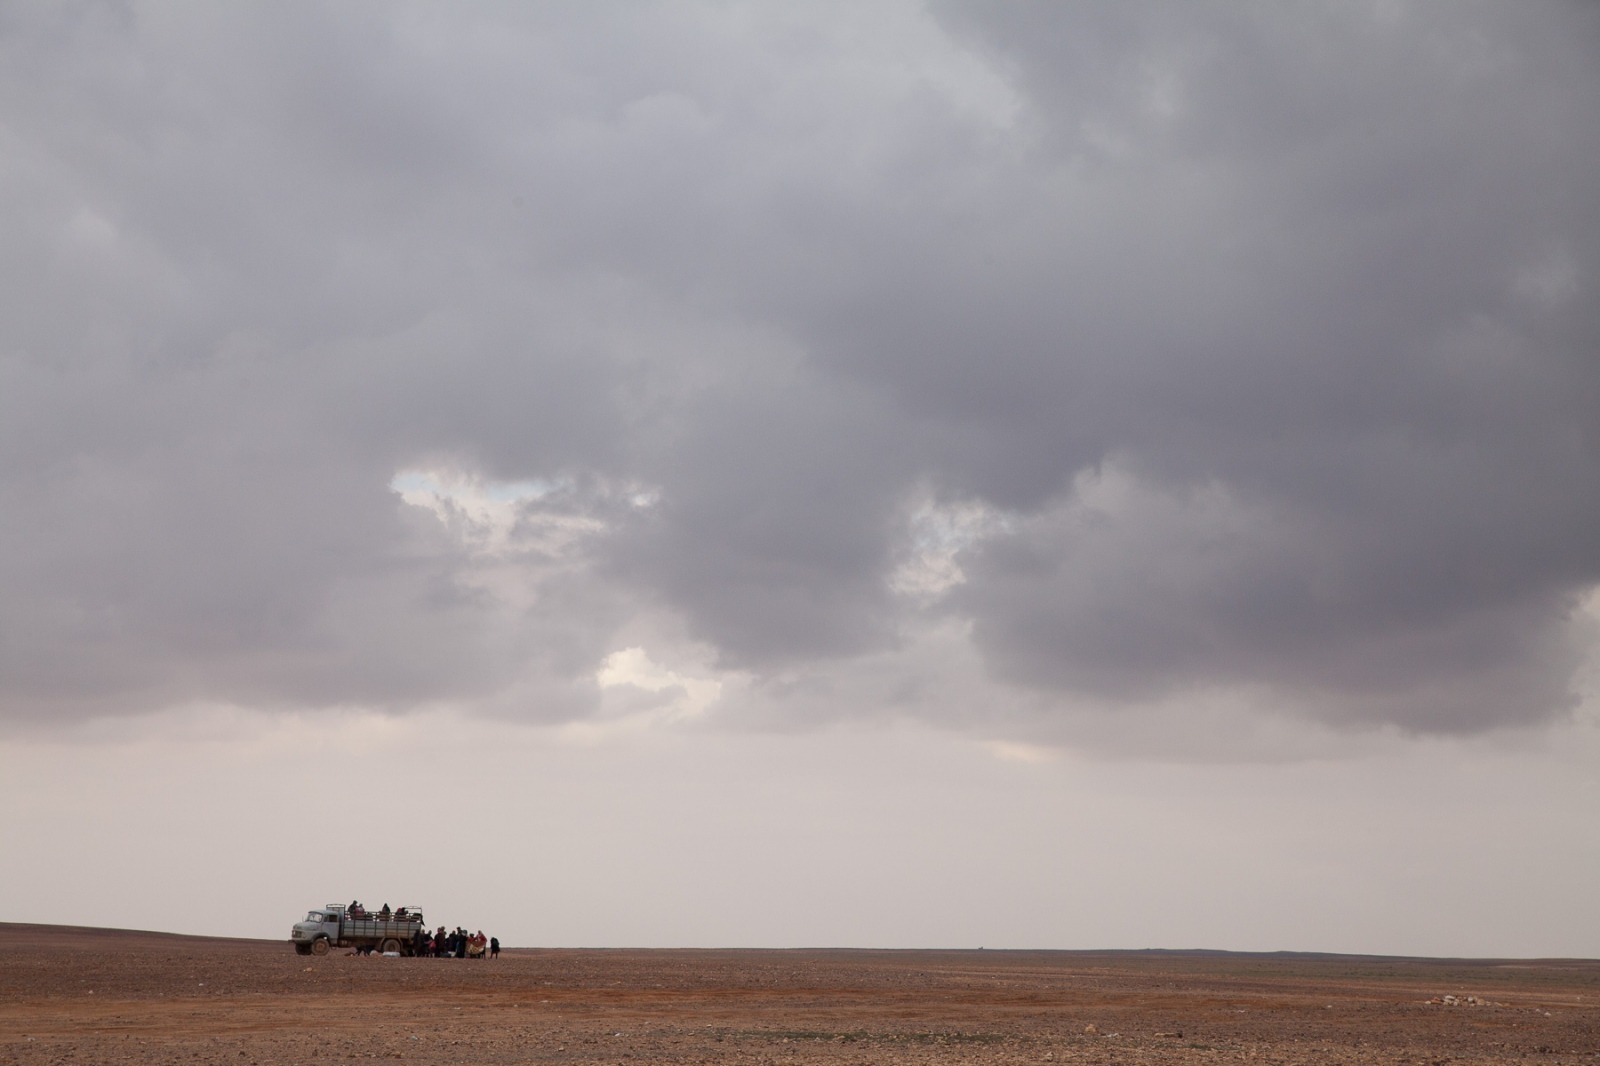 A group of refugees arrive on the Syrian side to a buffer zone several kilometers across dividing Jordan and Syria.